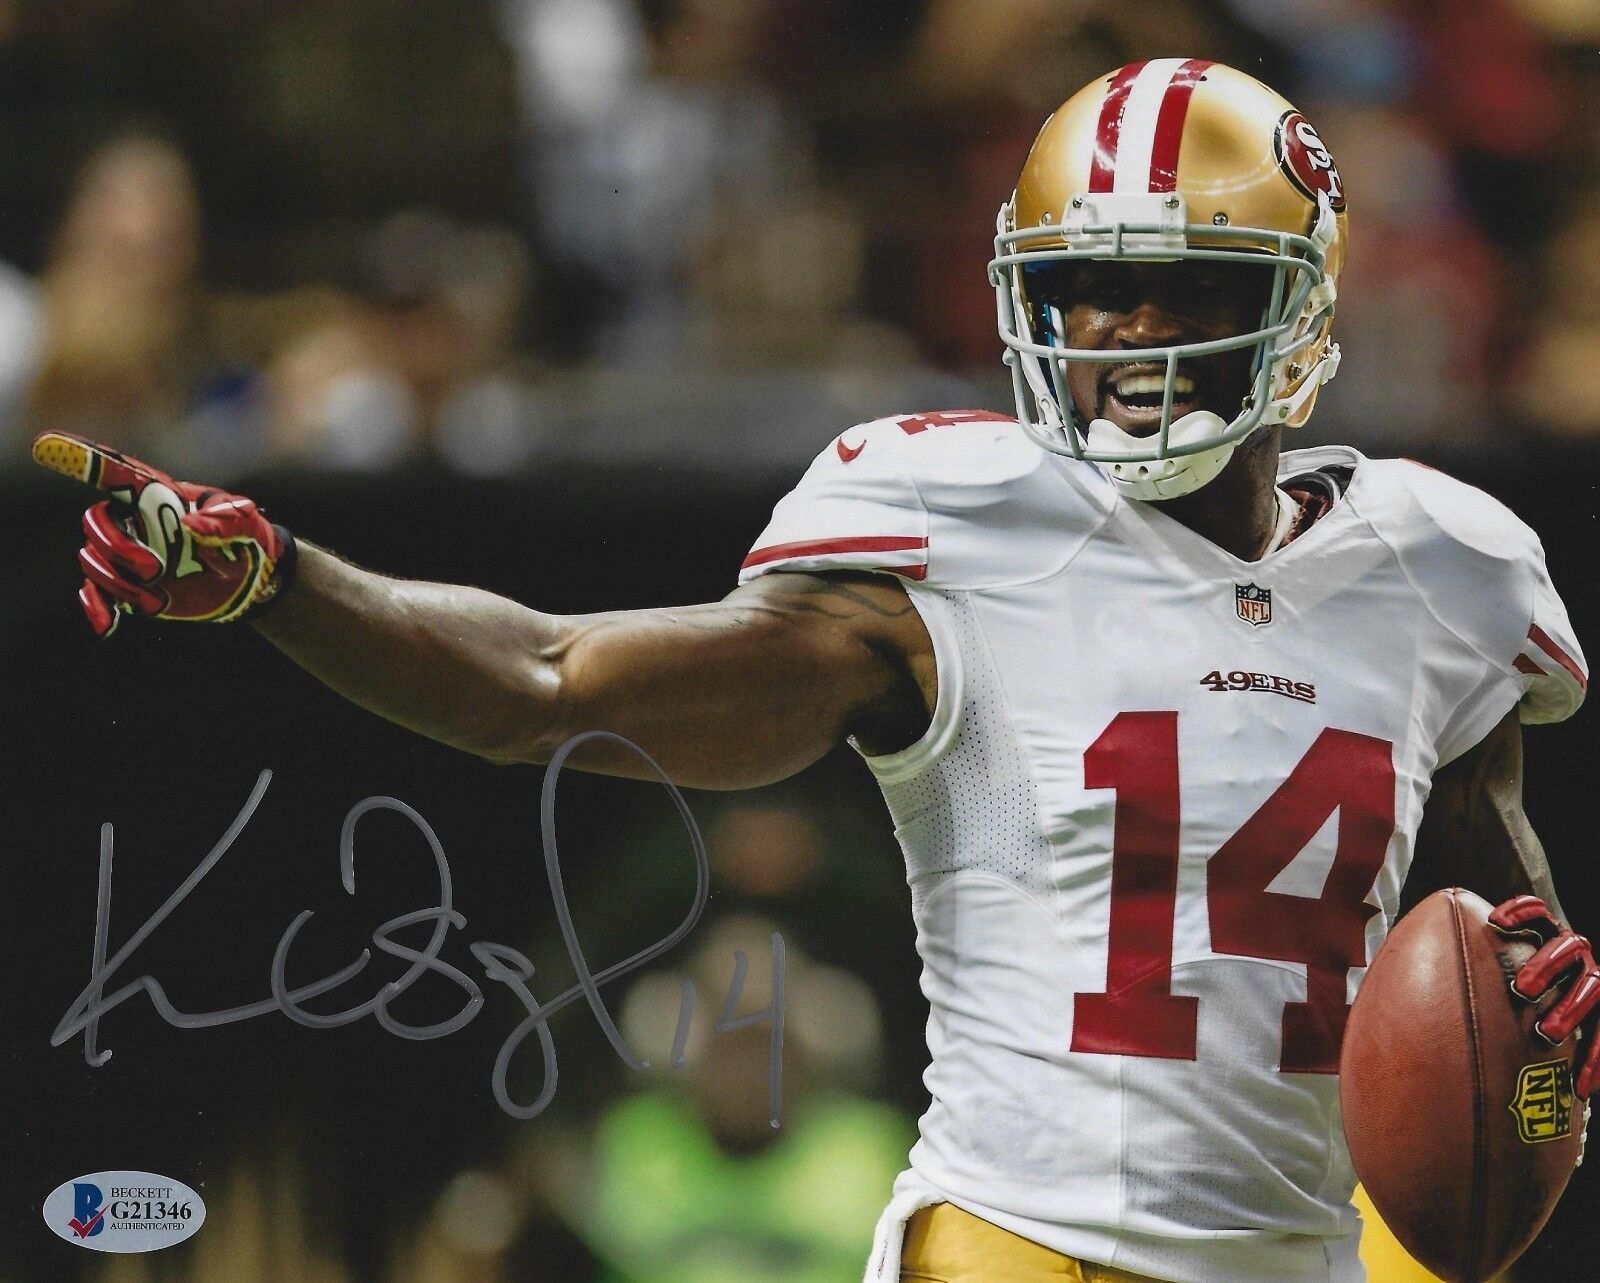 Kassim Osgood Signed 49ers Football 8x10 Photo Poster painting BAS Beckett COA Autograph Picture